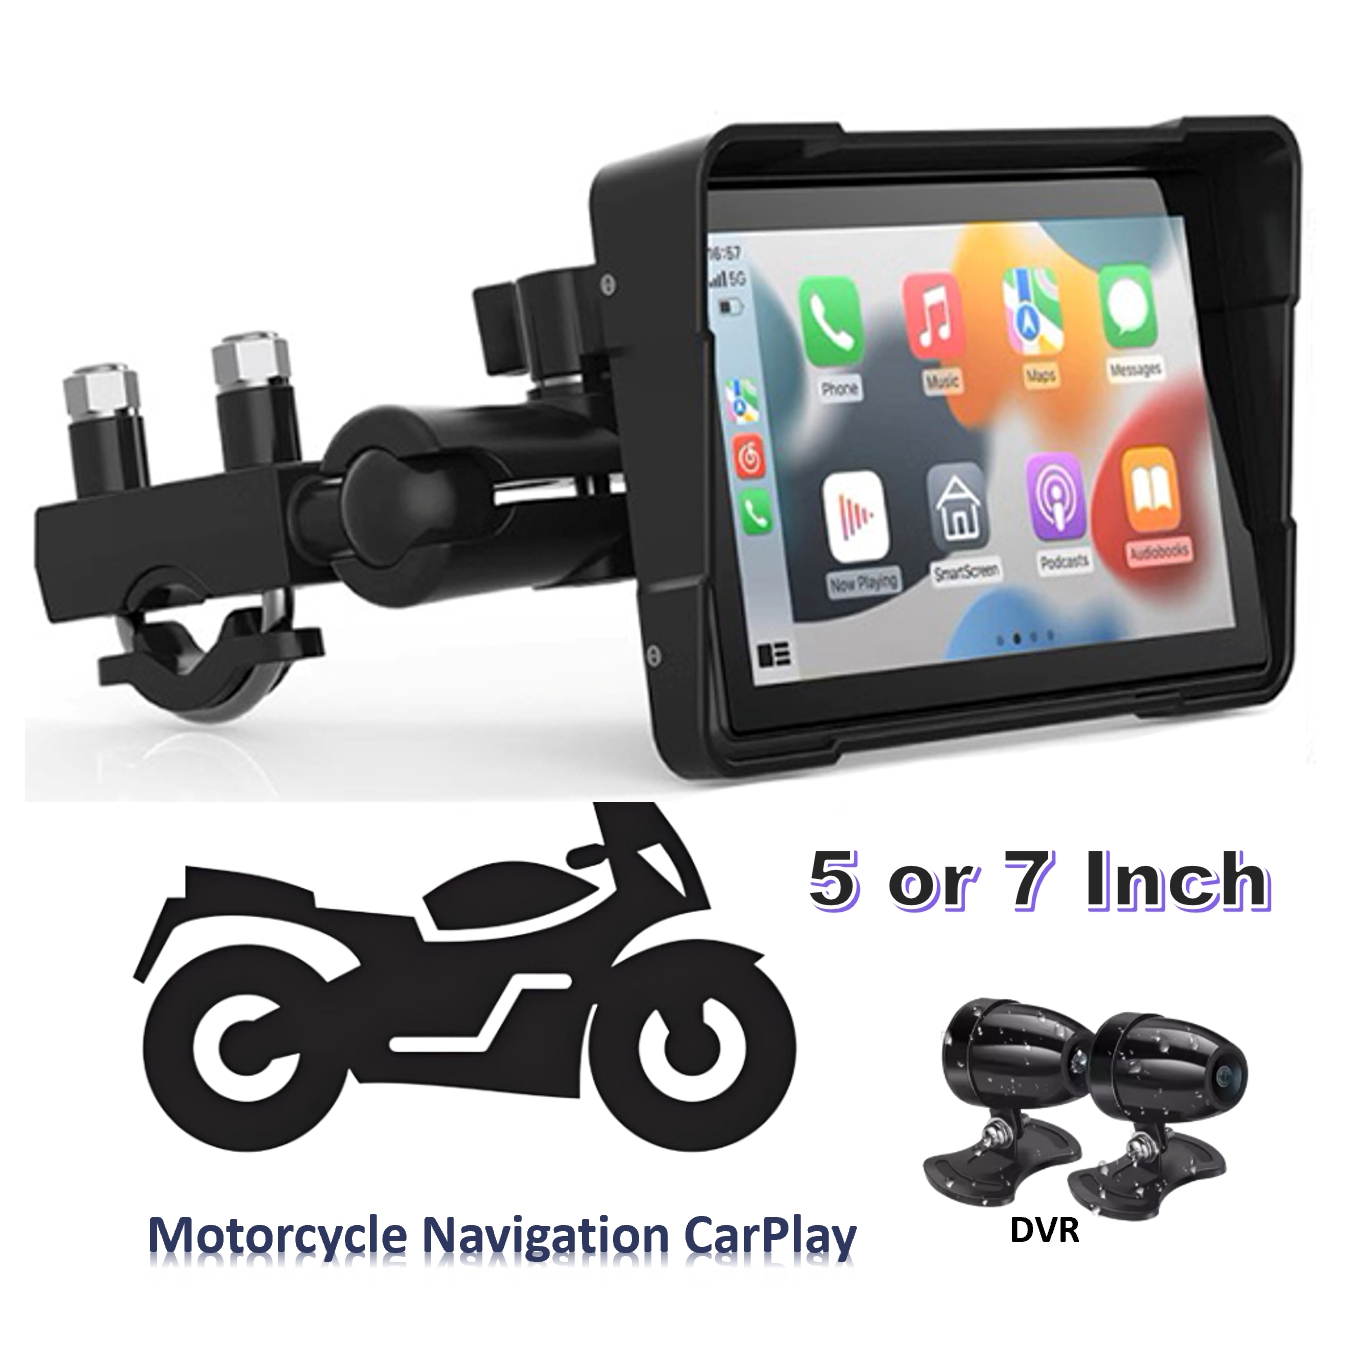 Zmecar Motorcycle Car Play IP67 Waterproof 5 Inch Touch Screen Android Auto DVR BT Navigation GPS Motorcycle Carplay